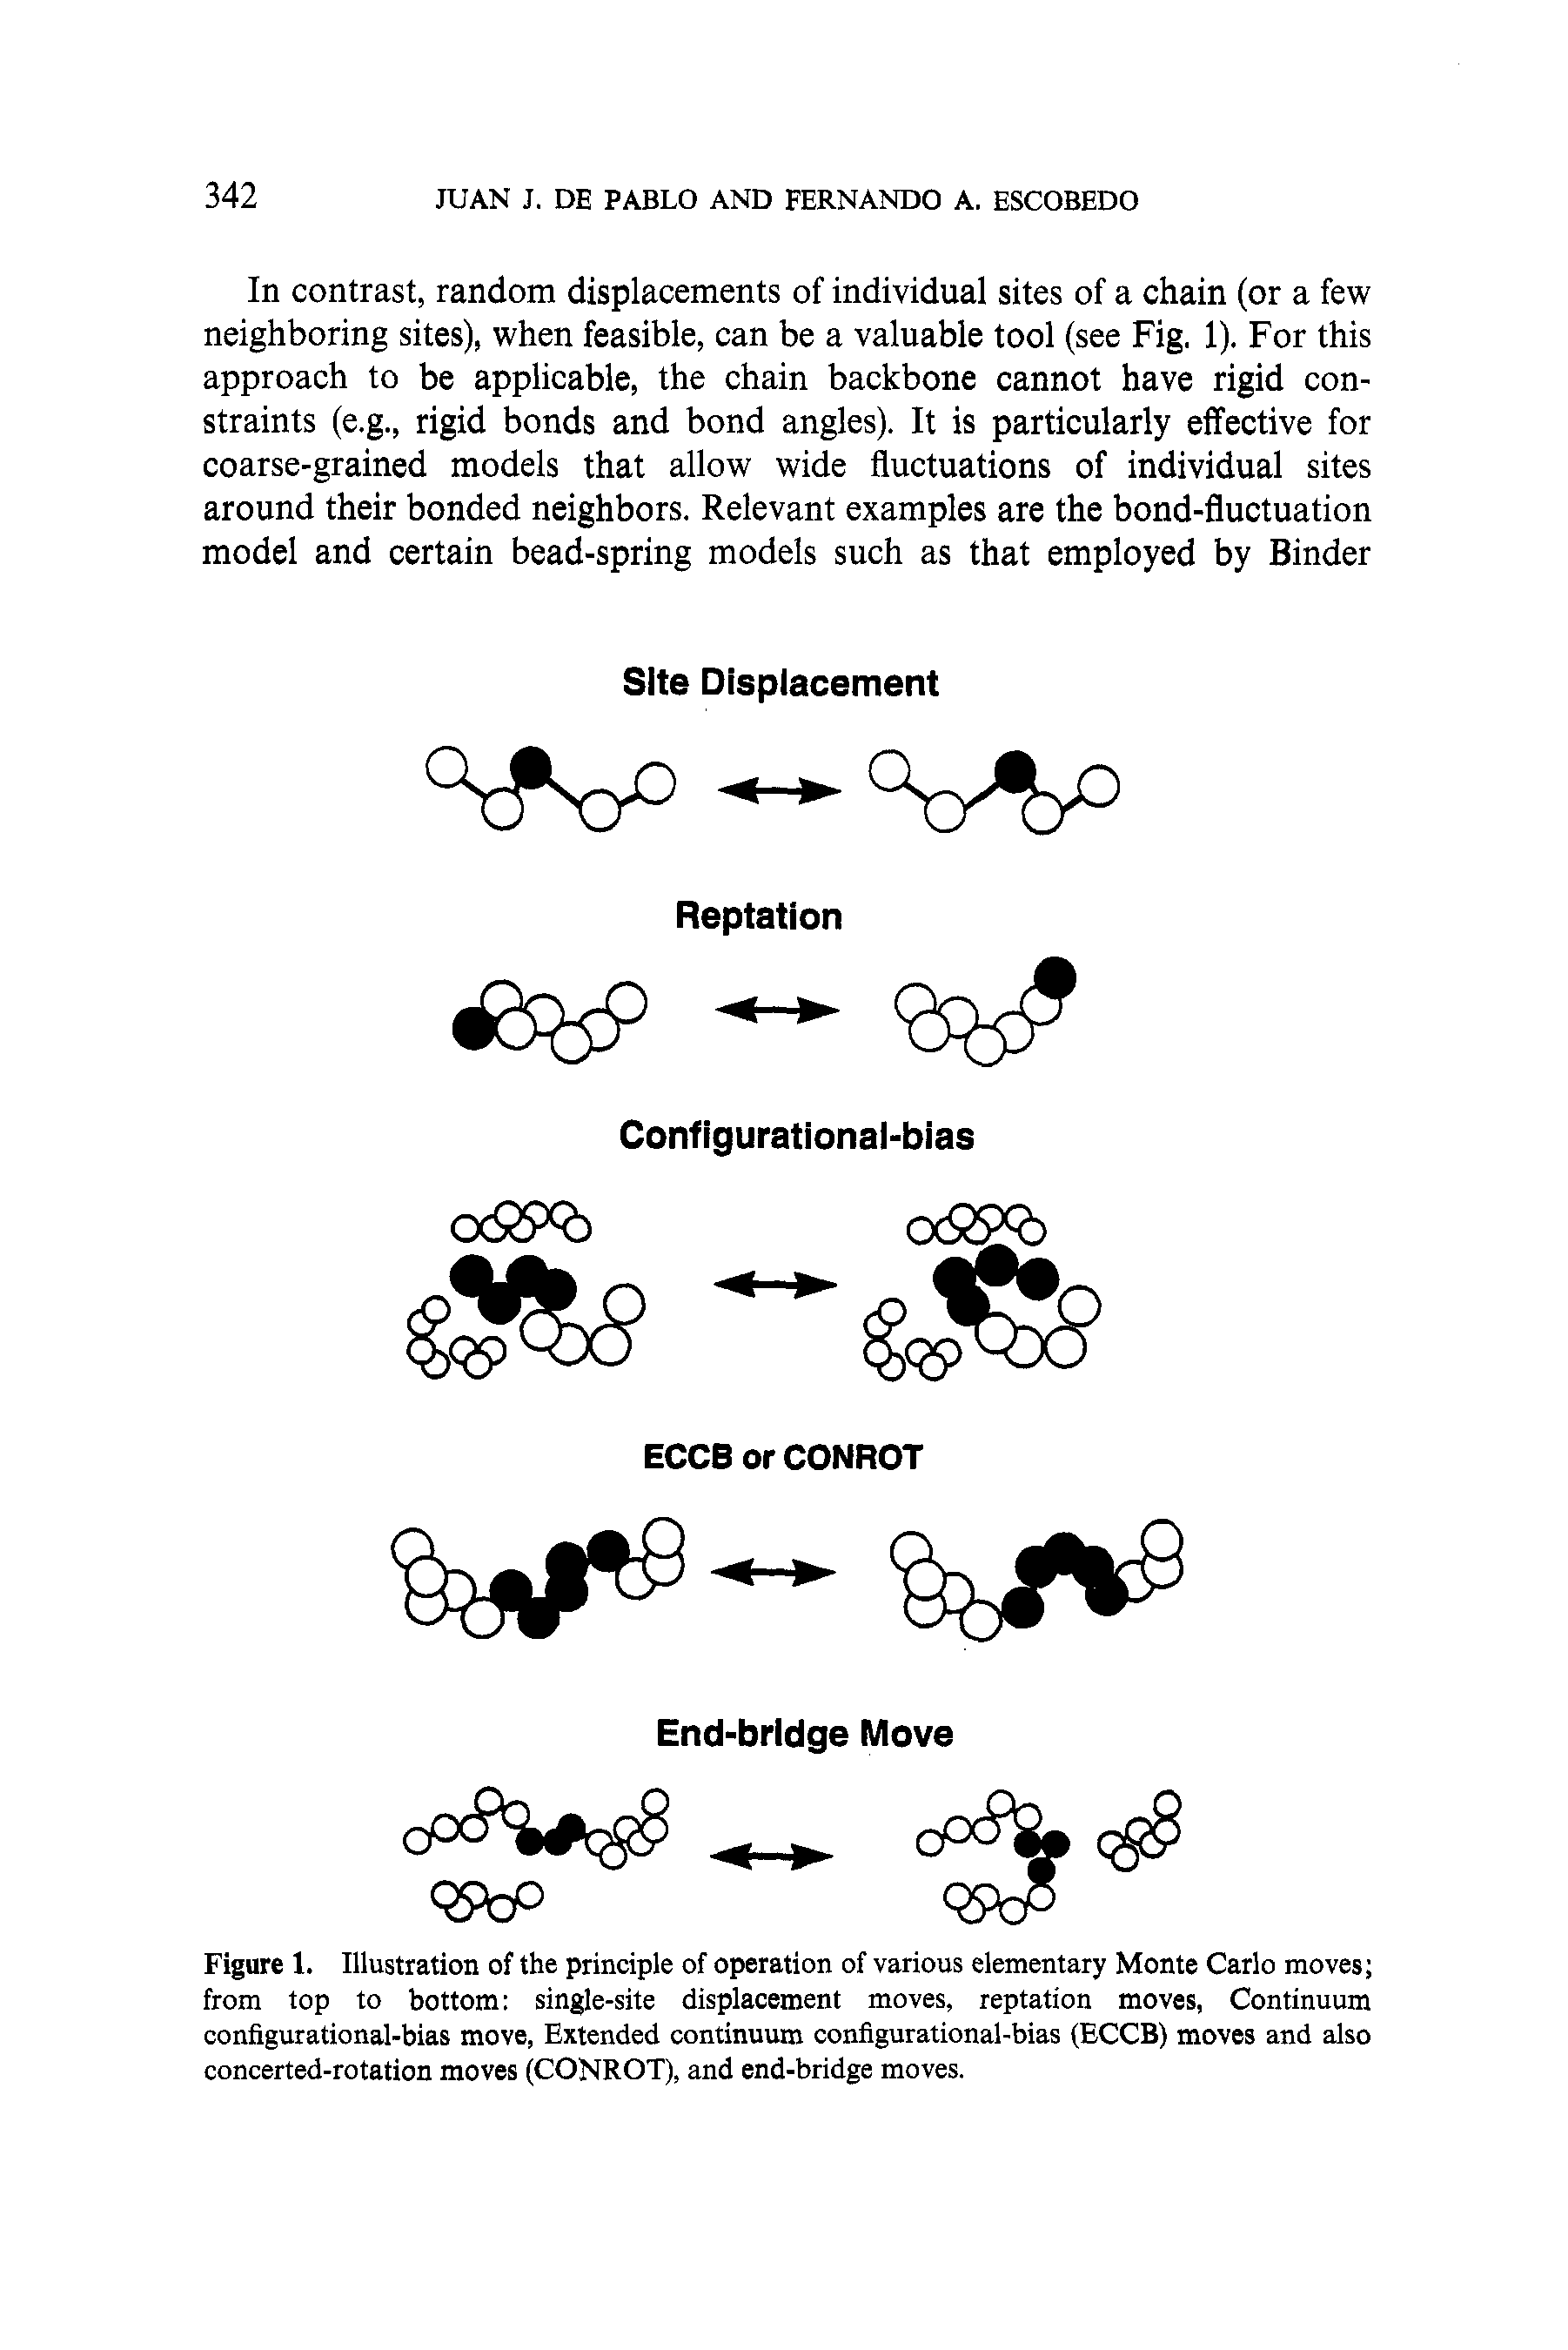 Figure 1. Illustration of the principle of operation of various elementary Monte Carlo moves from top to bottom single-site displacement moves, reptation moves, Continuum configurational-bias move, Extended continuum configurational-bias (ECCB) moves and also concerted-rotation moves (CONROT), and end-bridge moves.